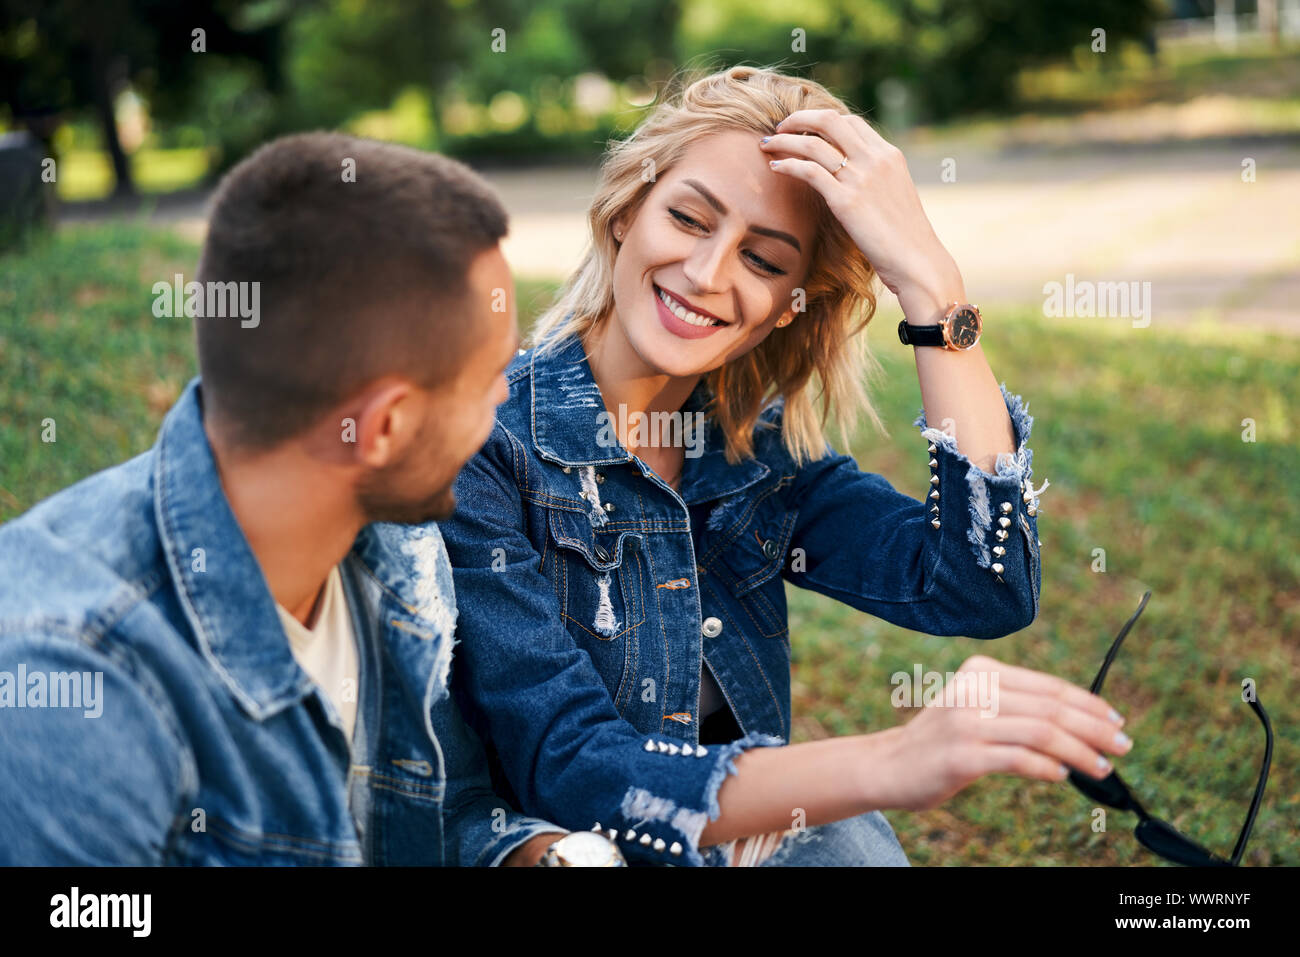 Happy couple in love flirting while dating. Love, romance concept Stock Photo